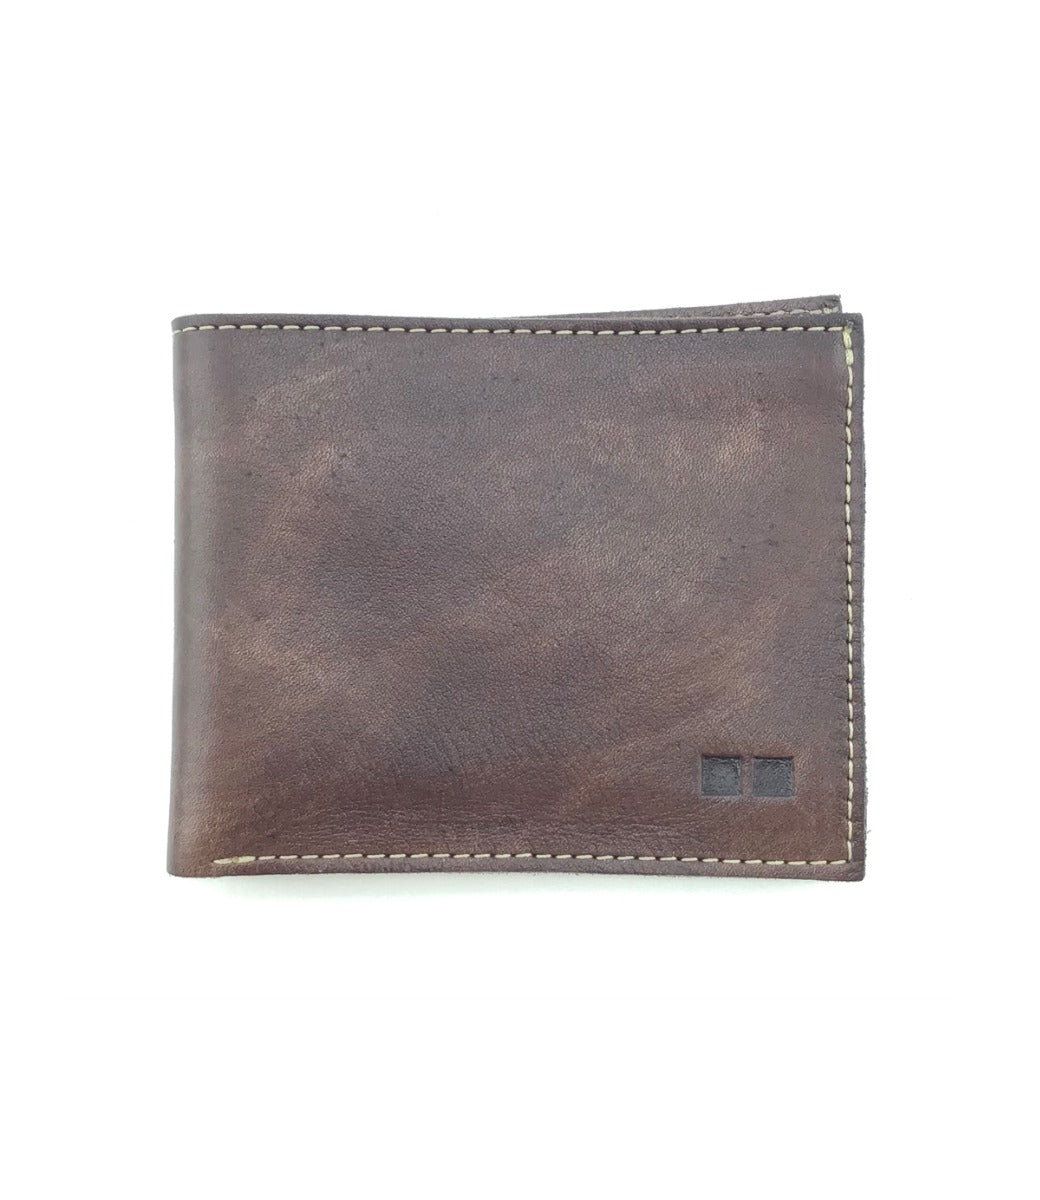 An Amidala brown leather wallet on a white background by Bed Stu.